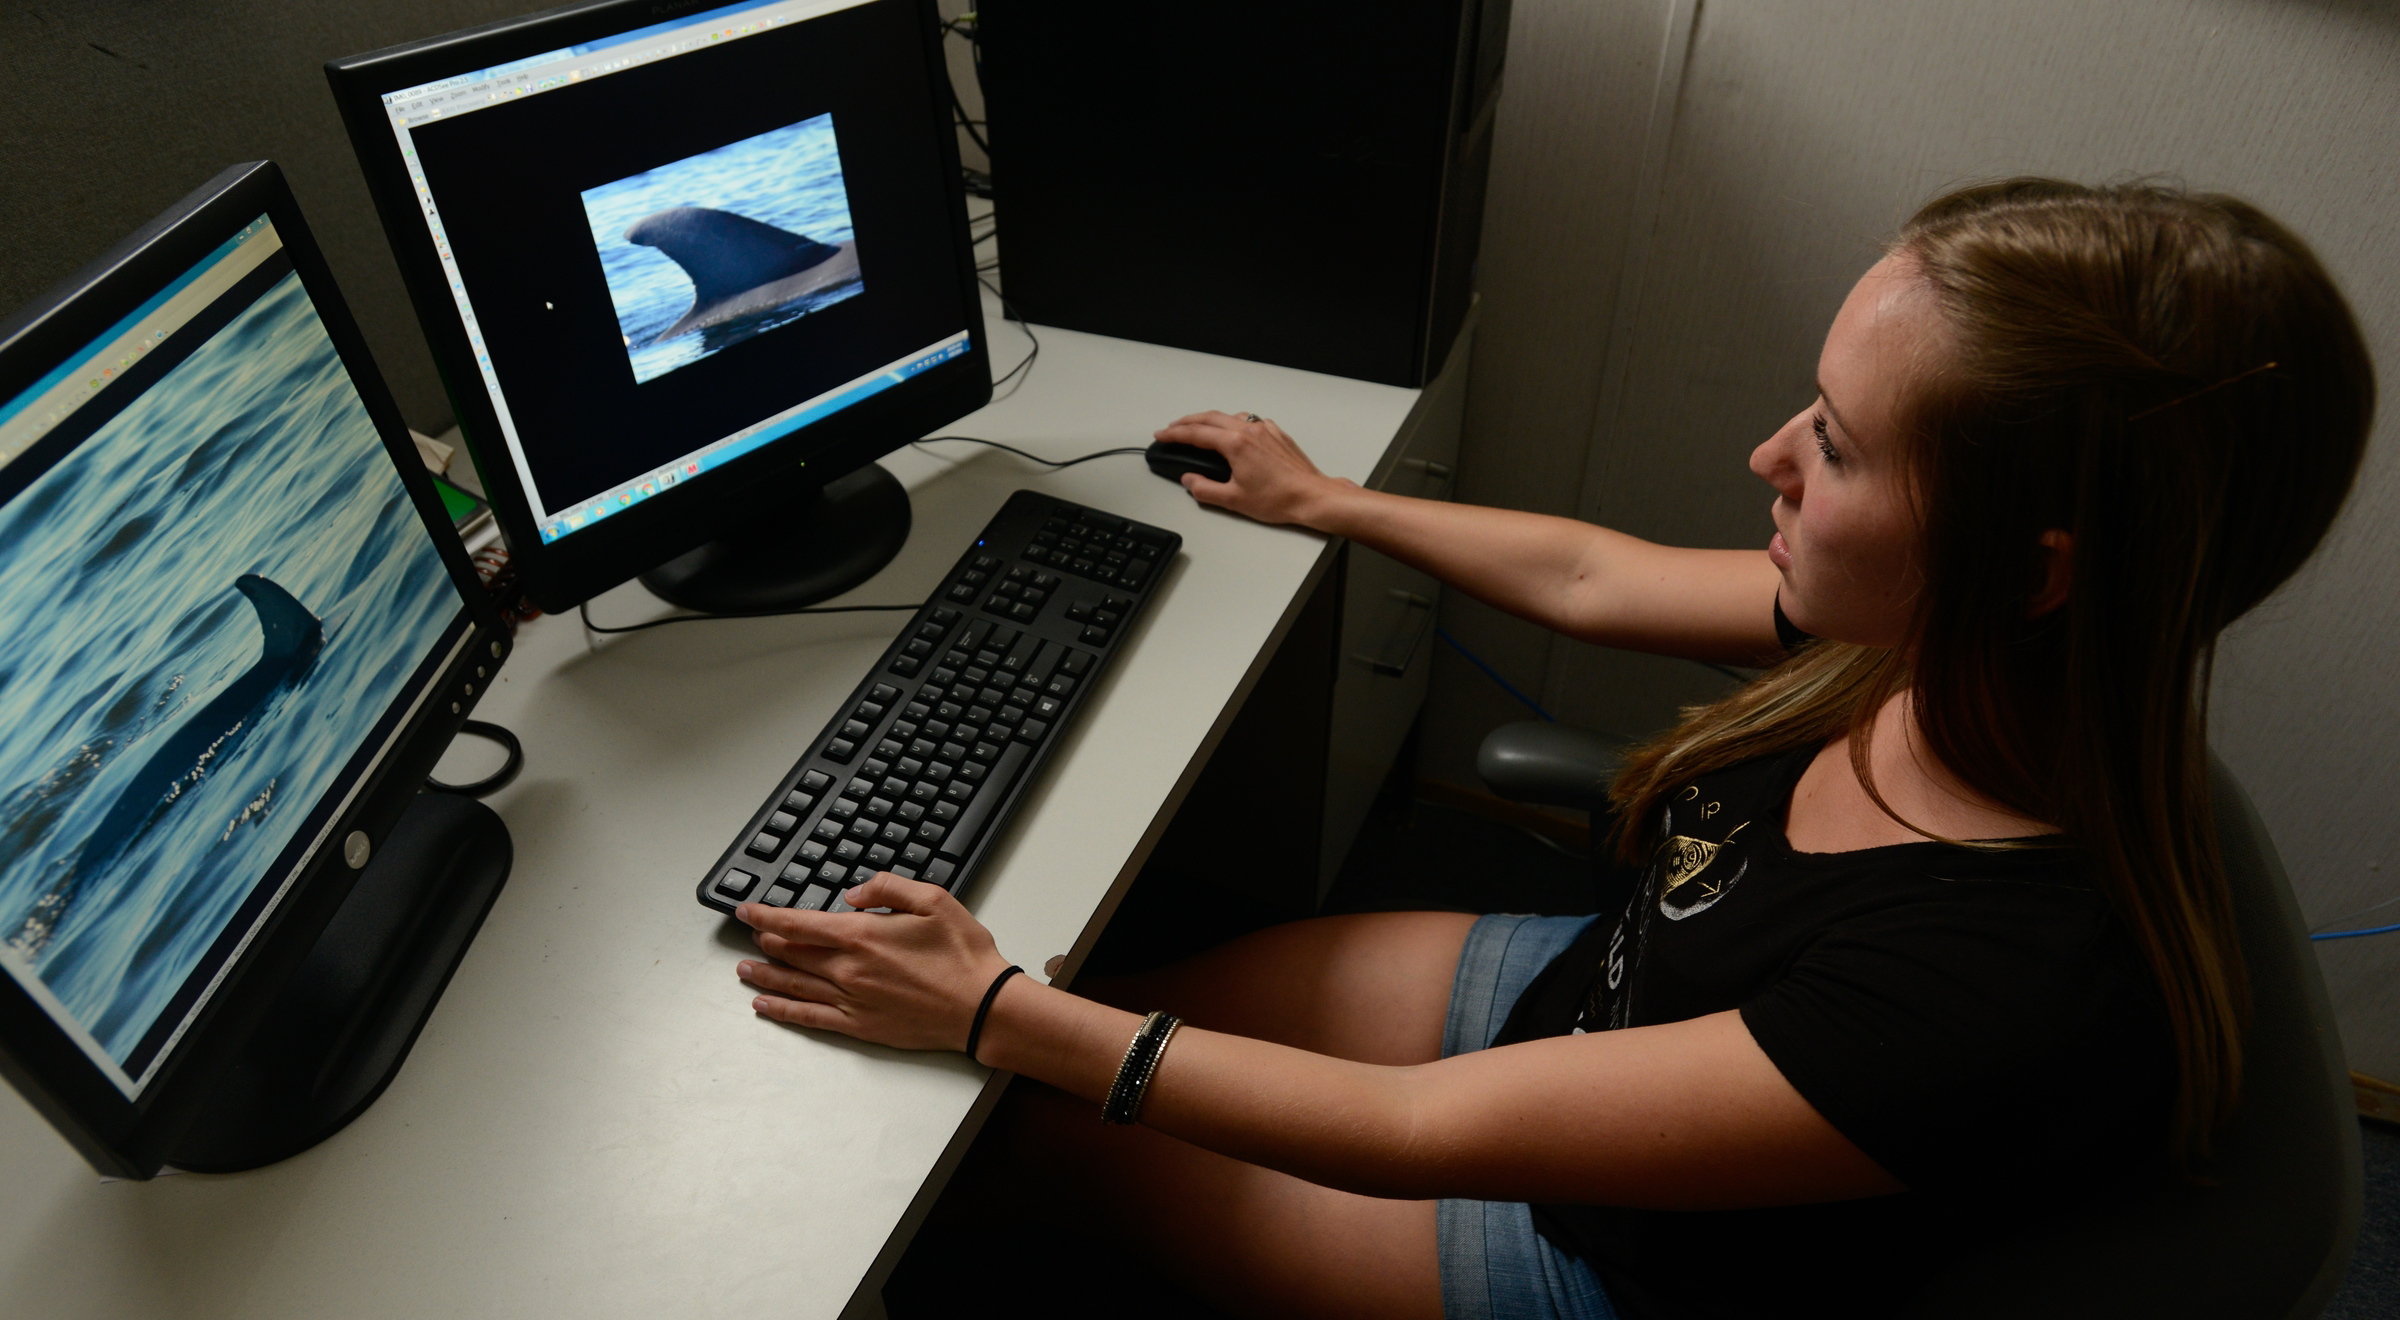 Hannah Findley a sophomore biochemistry major photo processes dolphin fin photos for the Finbase Program which catalogs local dolphins.